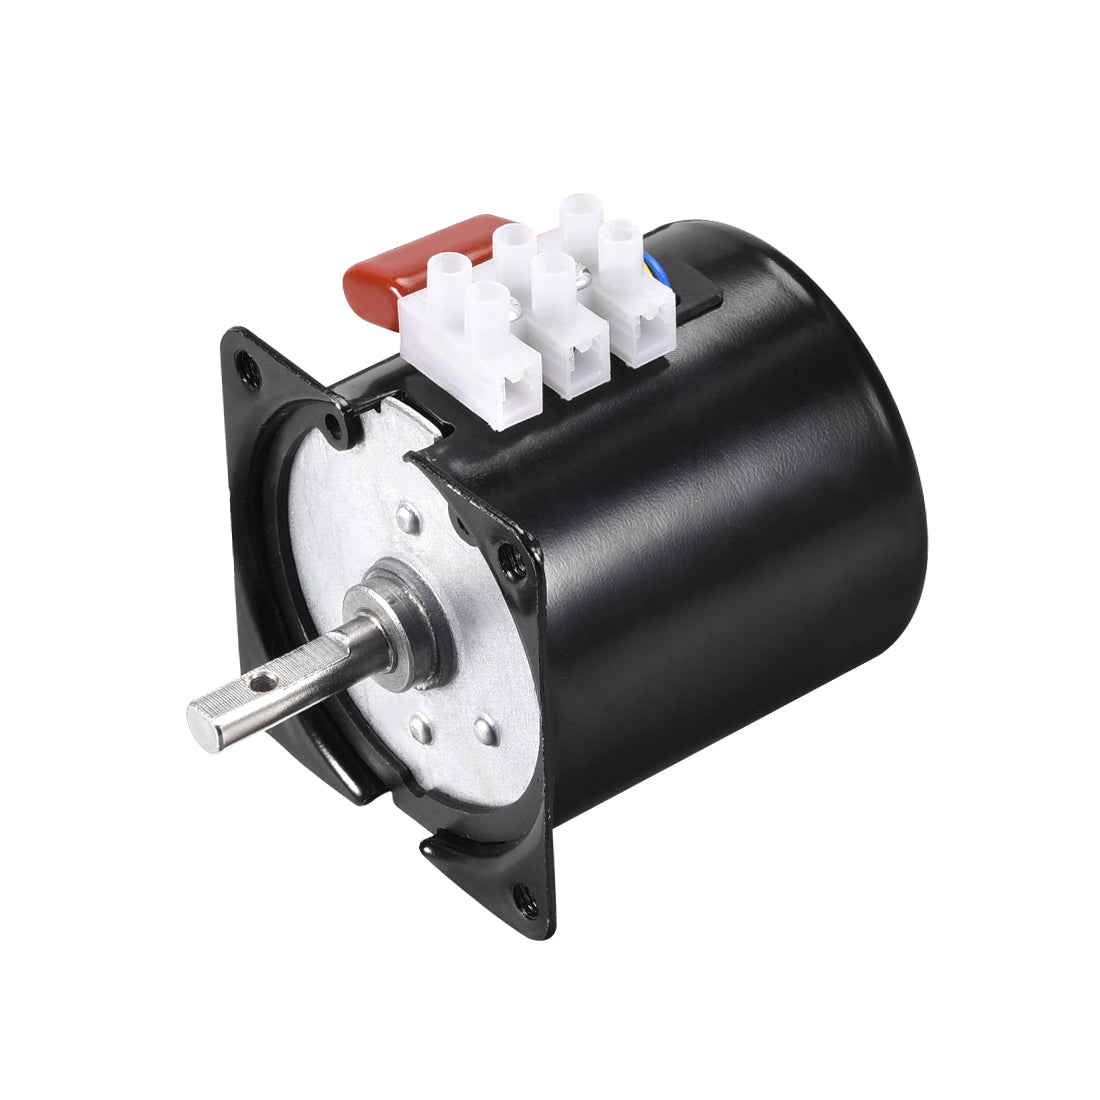 uxcell Uxcell AC 220V Electric Synchronous Motor Metal Gear Turntable /C 10RPM 50-60HZ 14W 7mm Dia Central Shaft with Hole